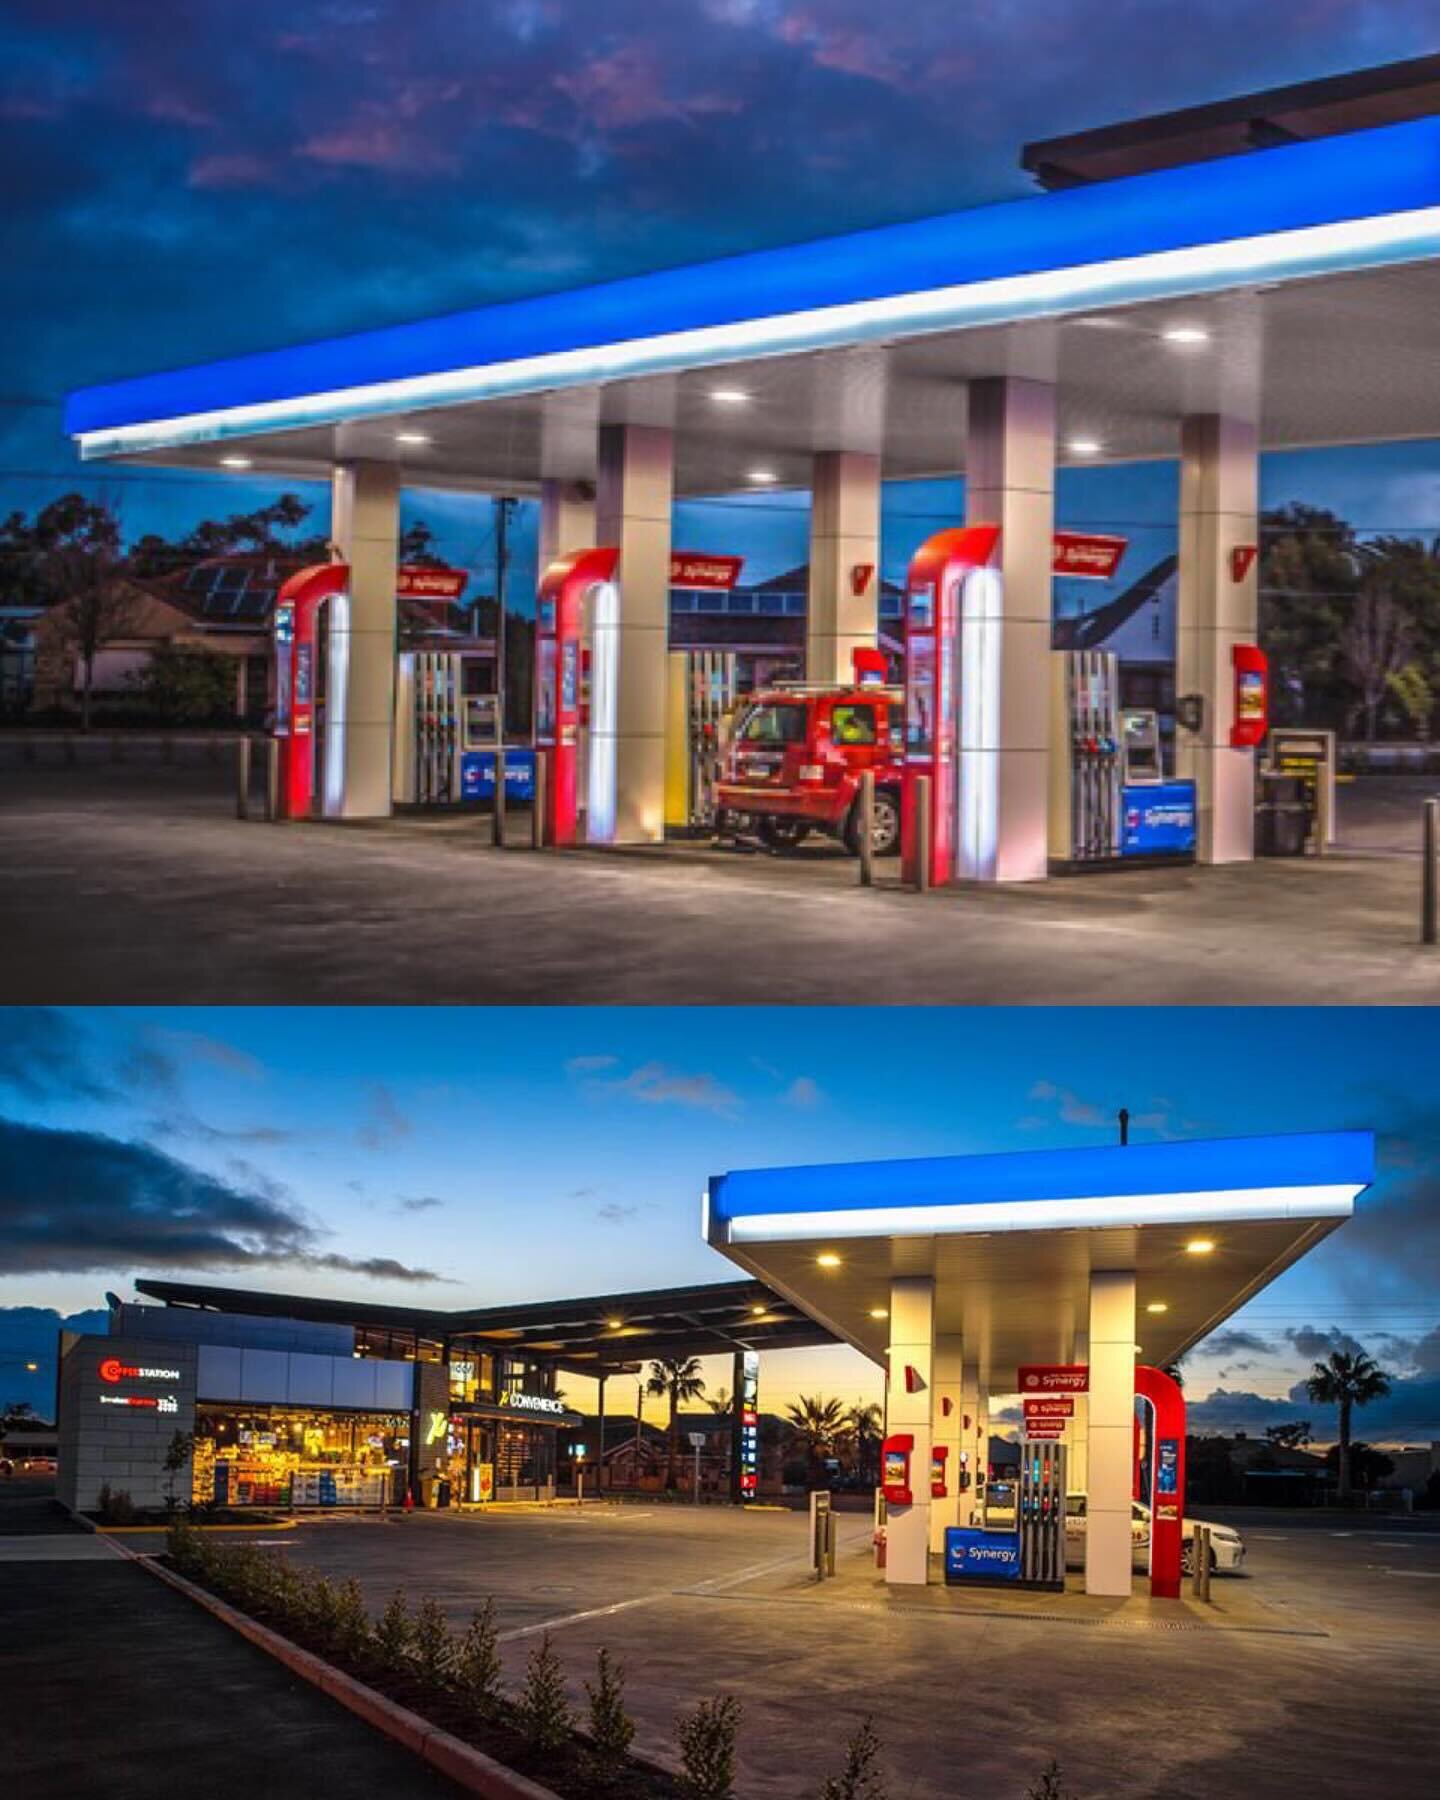 X Convenience not only a fueling destination but a visually appealing, a well-planned functional elements and creating contemporary and inviting space. @anthonyciroccodesign 
#retaildesign #petrolstationdesign #xconvience #commercialdesign #southaust